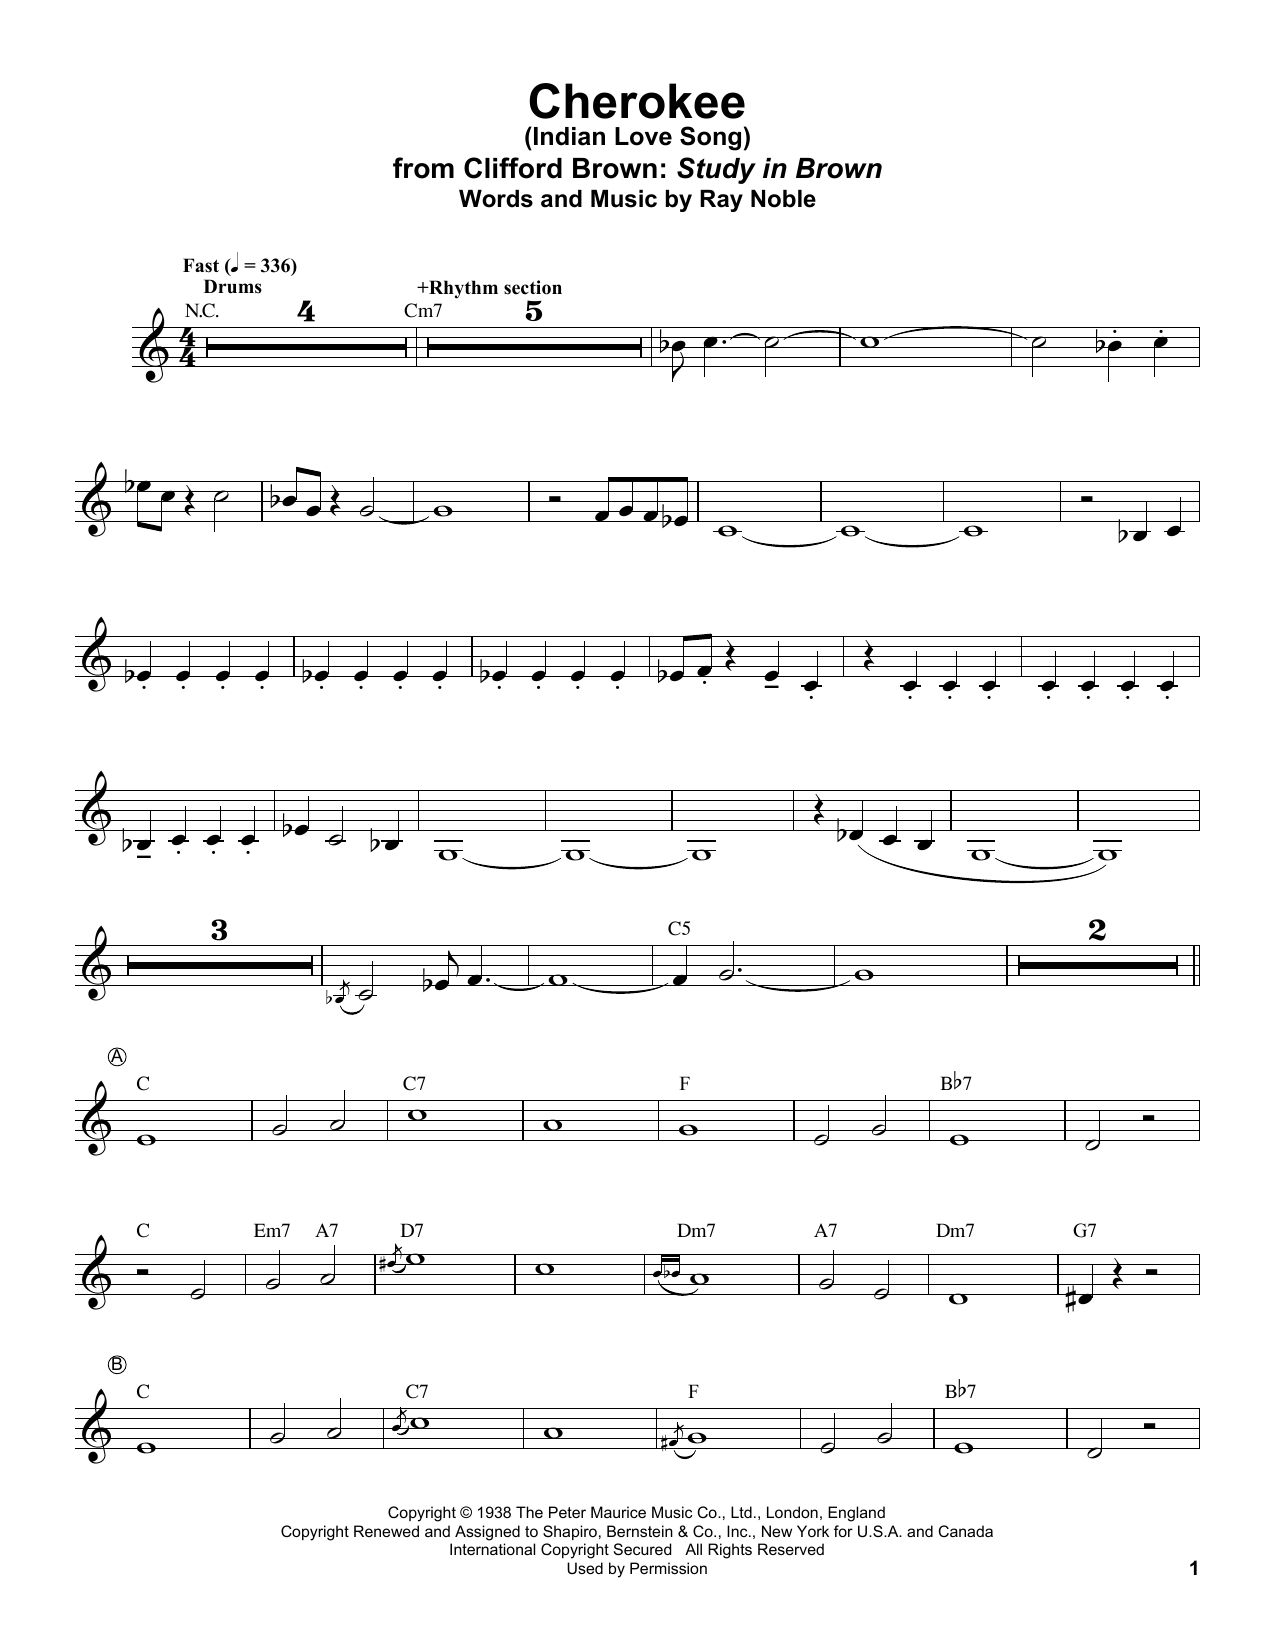 Download Clifford Brown Cherokee (Indian Love Song) Sheet Music